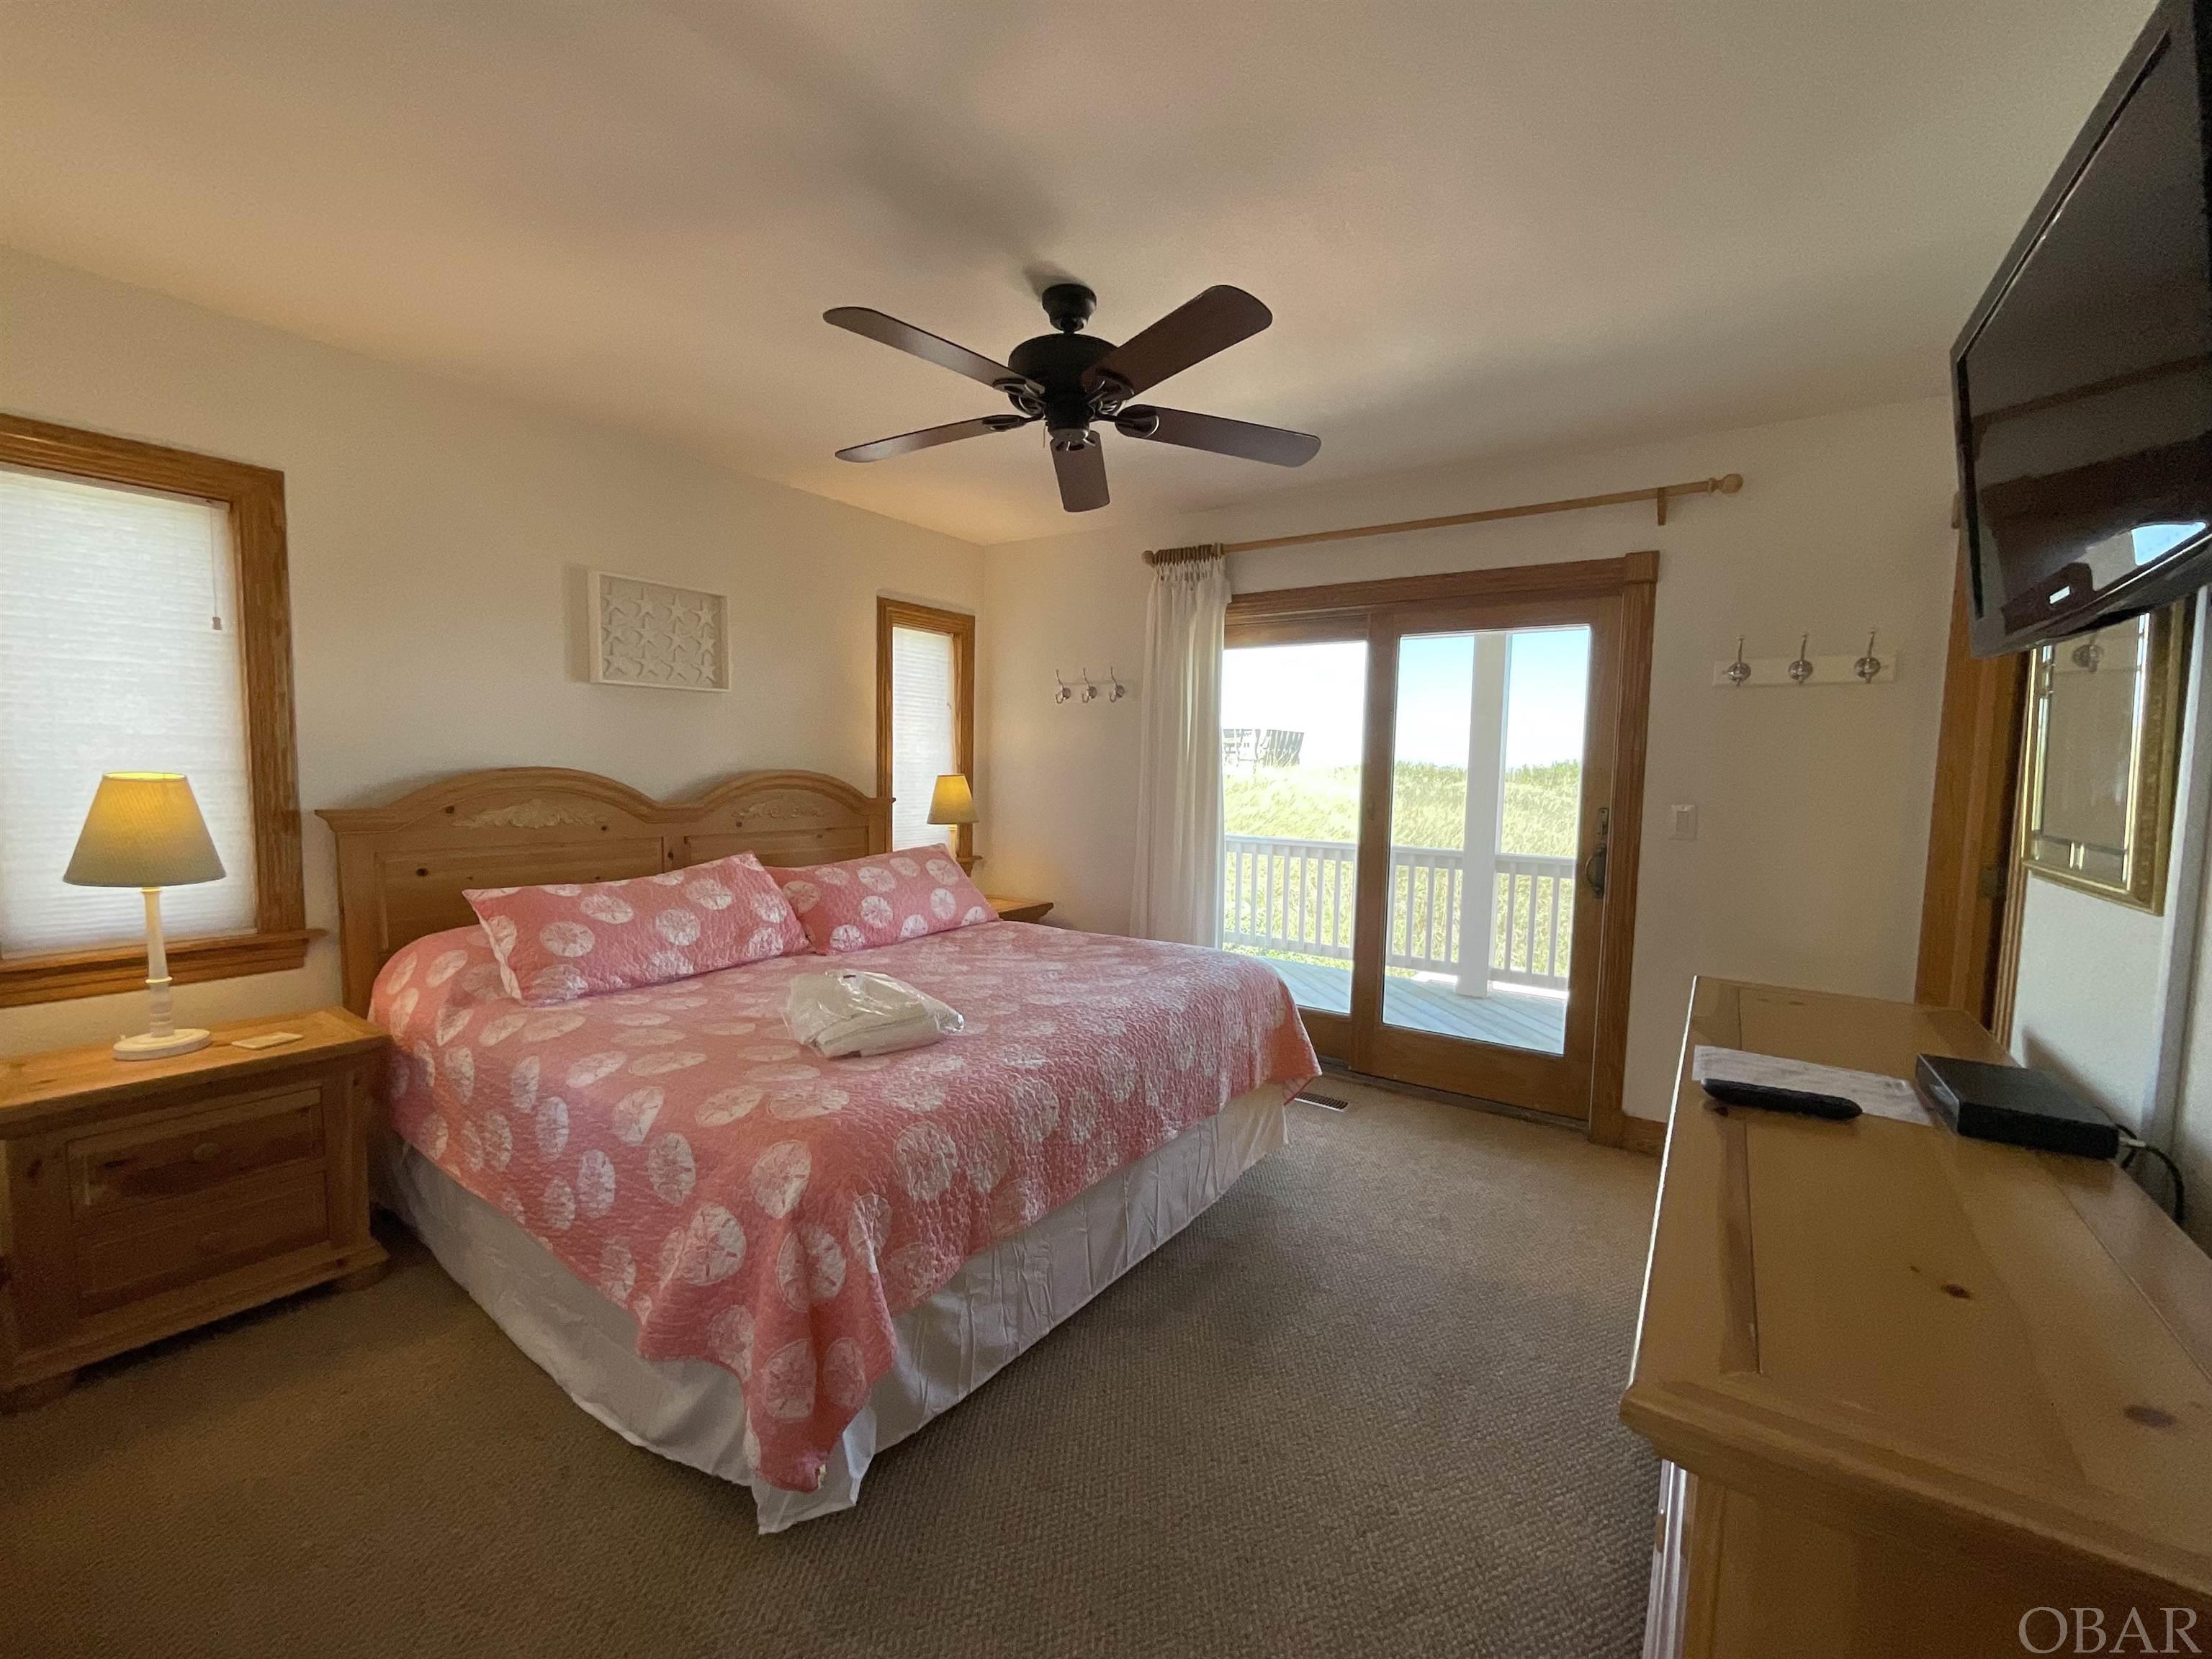 2303 Oneto Lane, Nags Head, NC 27959, 5 Bedrooms Bedrooms, ,5 BathroomsBathrooms,Residential,For sale,Oneto Lane,124842